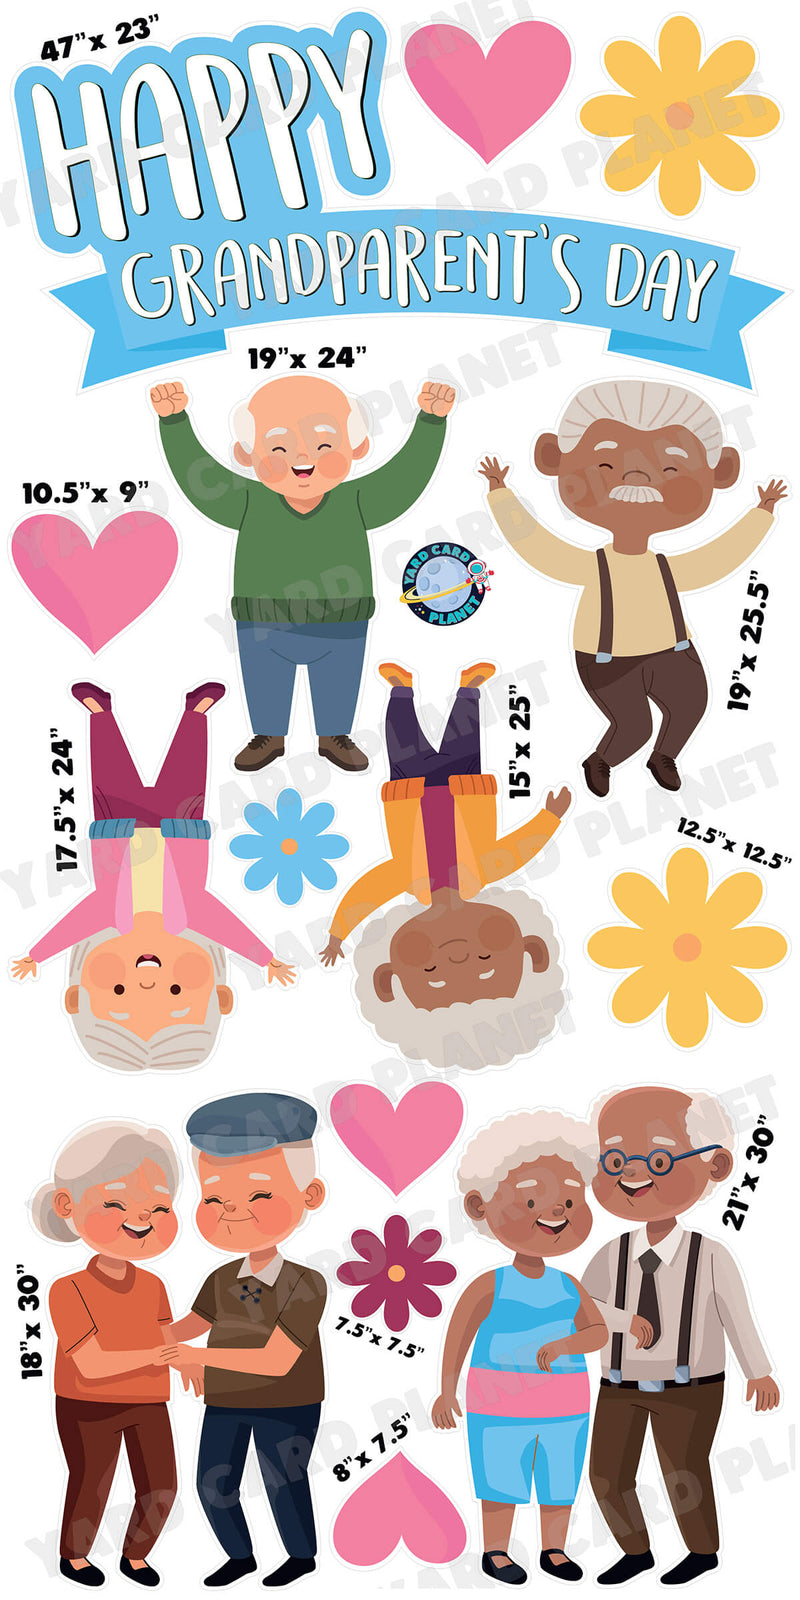 Happy Grandparent's Day EZ Quick Sign and Yard Card Flair Set with Measurements